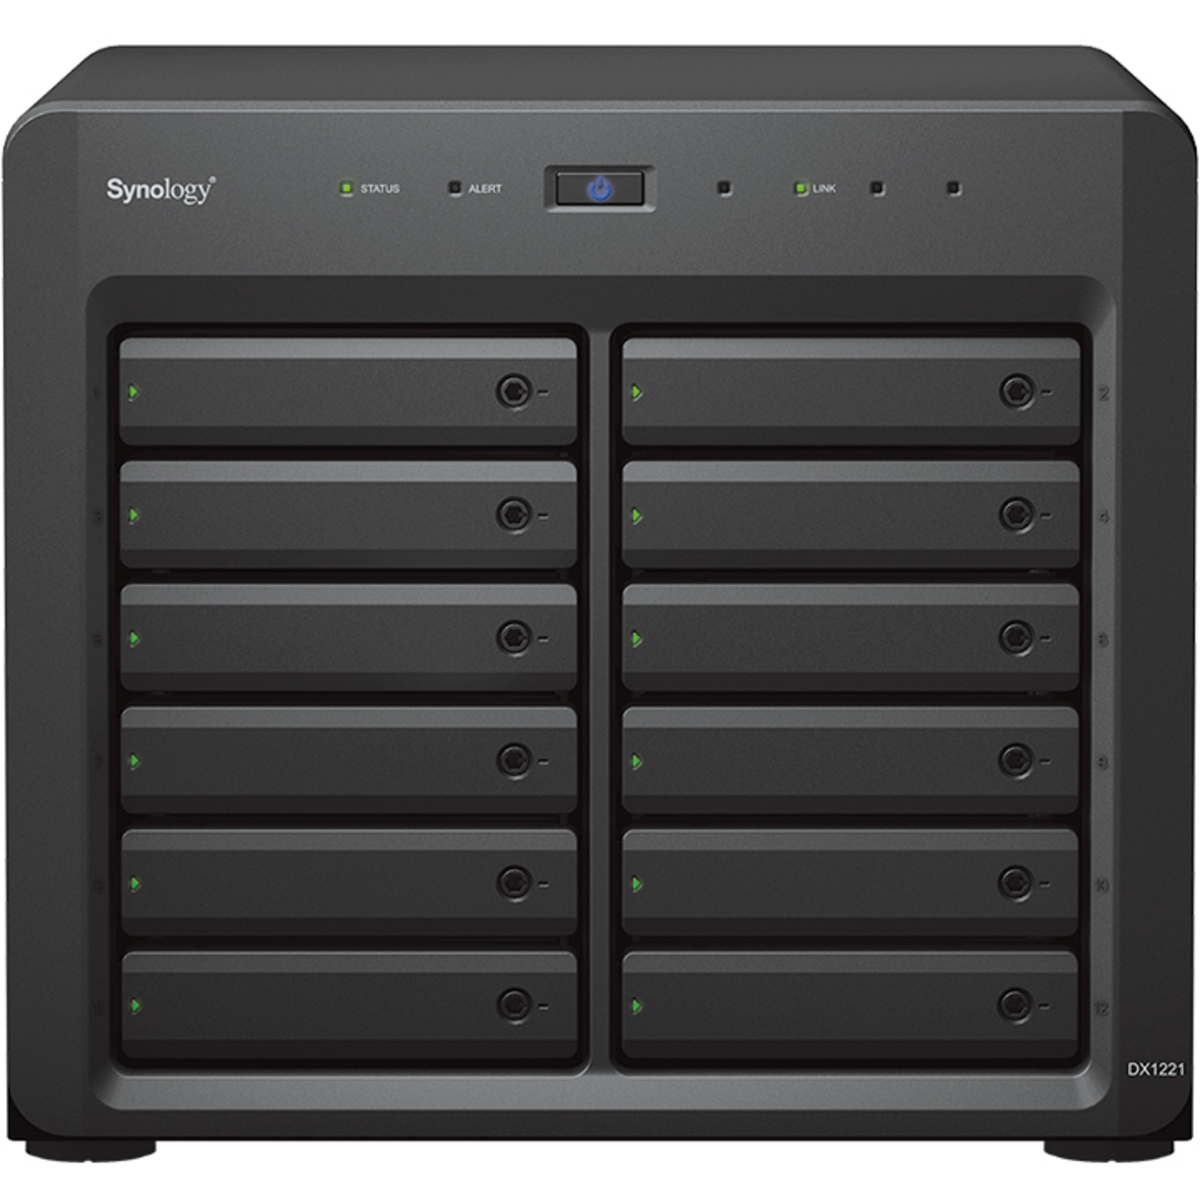 Synology DX1222 External Expansion Drive 140tb 12-Bay Desktop Multimedia / Power User / Business Expansion Enclosure 10x14tb Seagate IronWolf Pro ST14000NT001 3.5 7200rpm SATA 6Gb/s HDD NAS Class Drives Installed - Burn-In Tested DX1222 External Expansion Drive